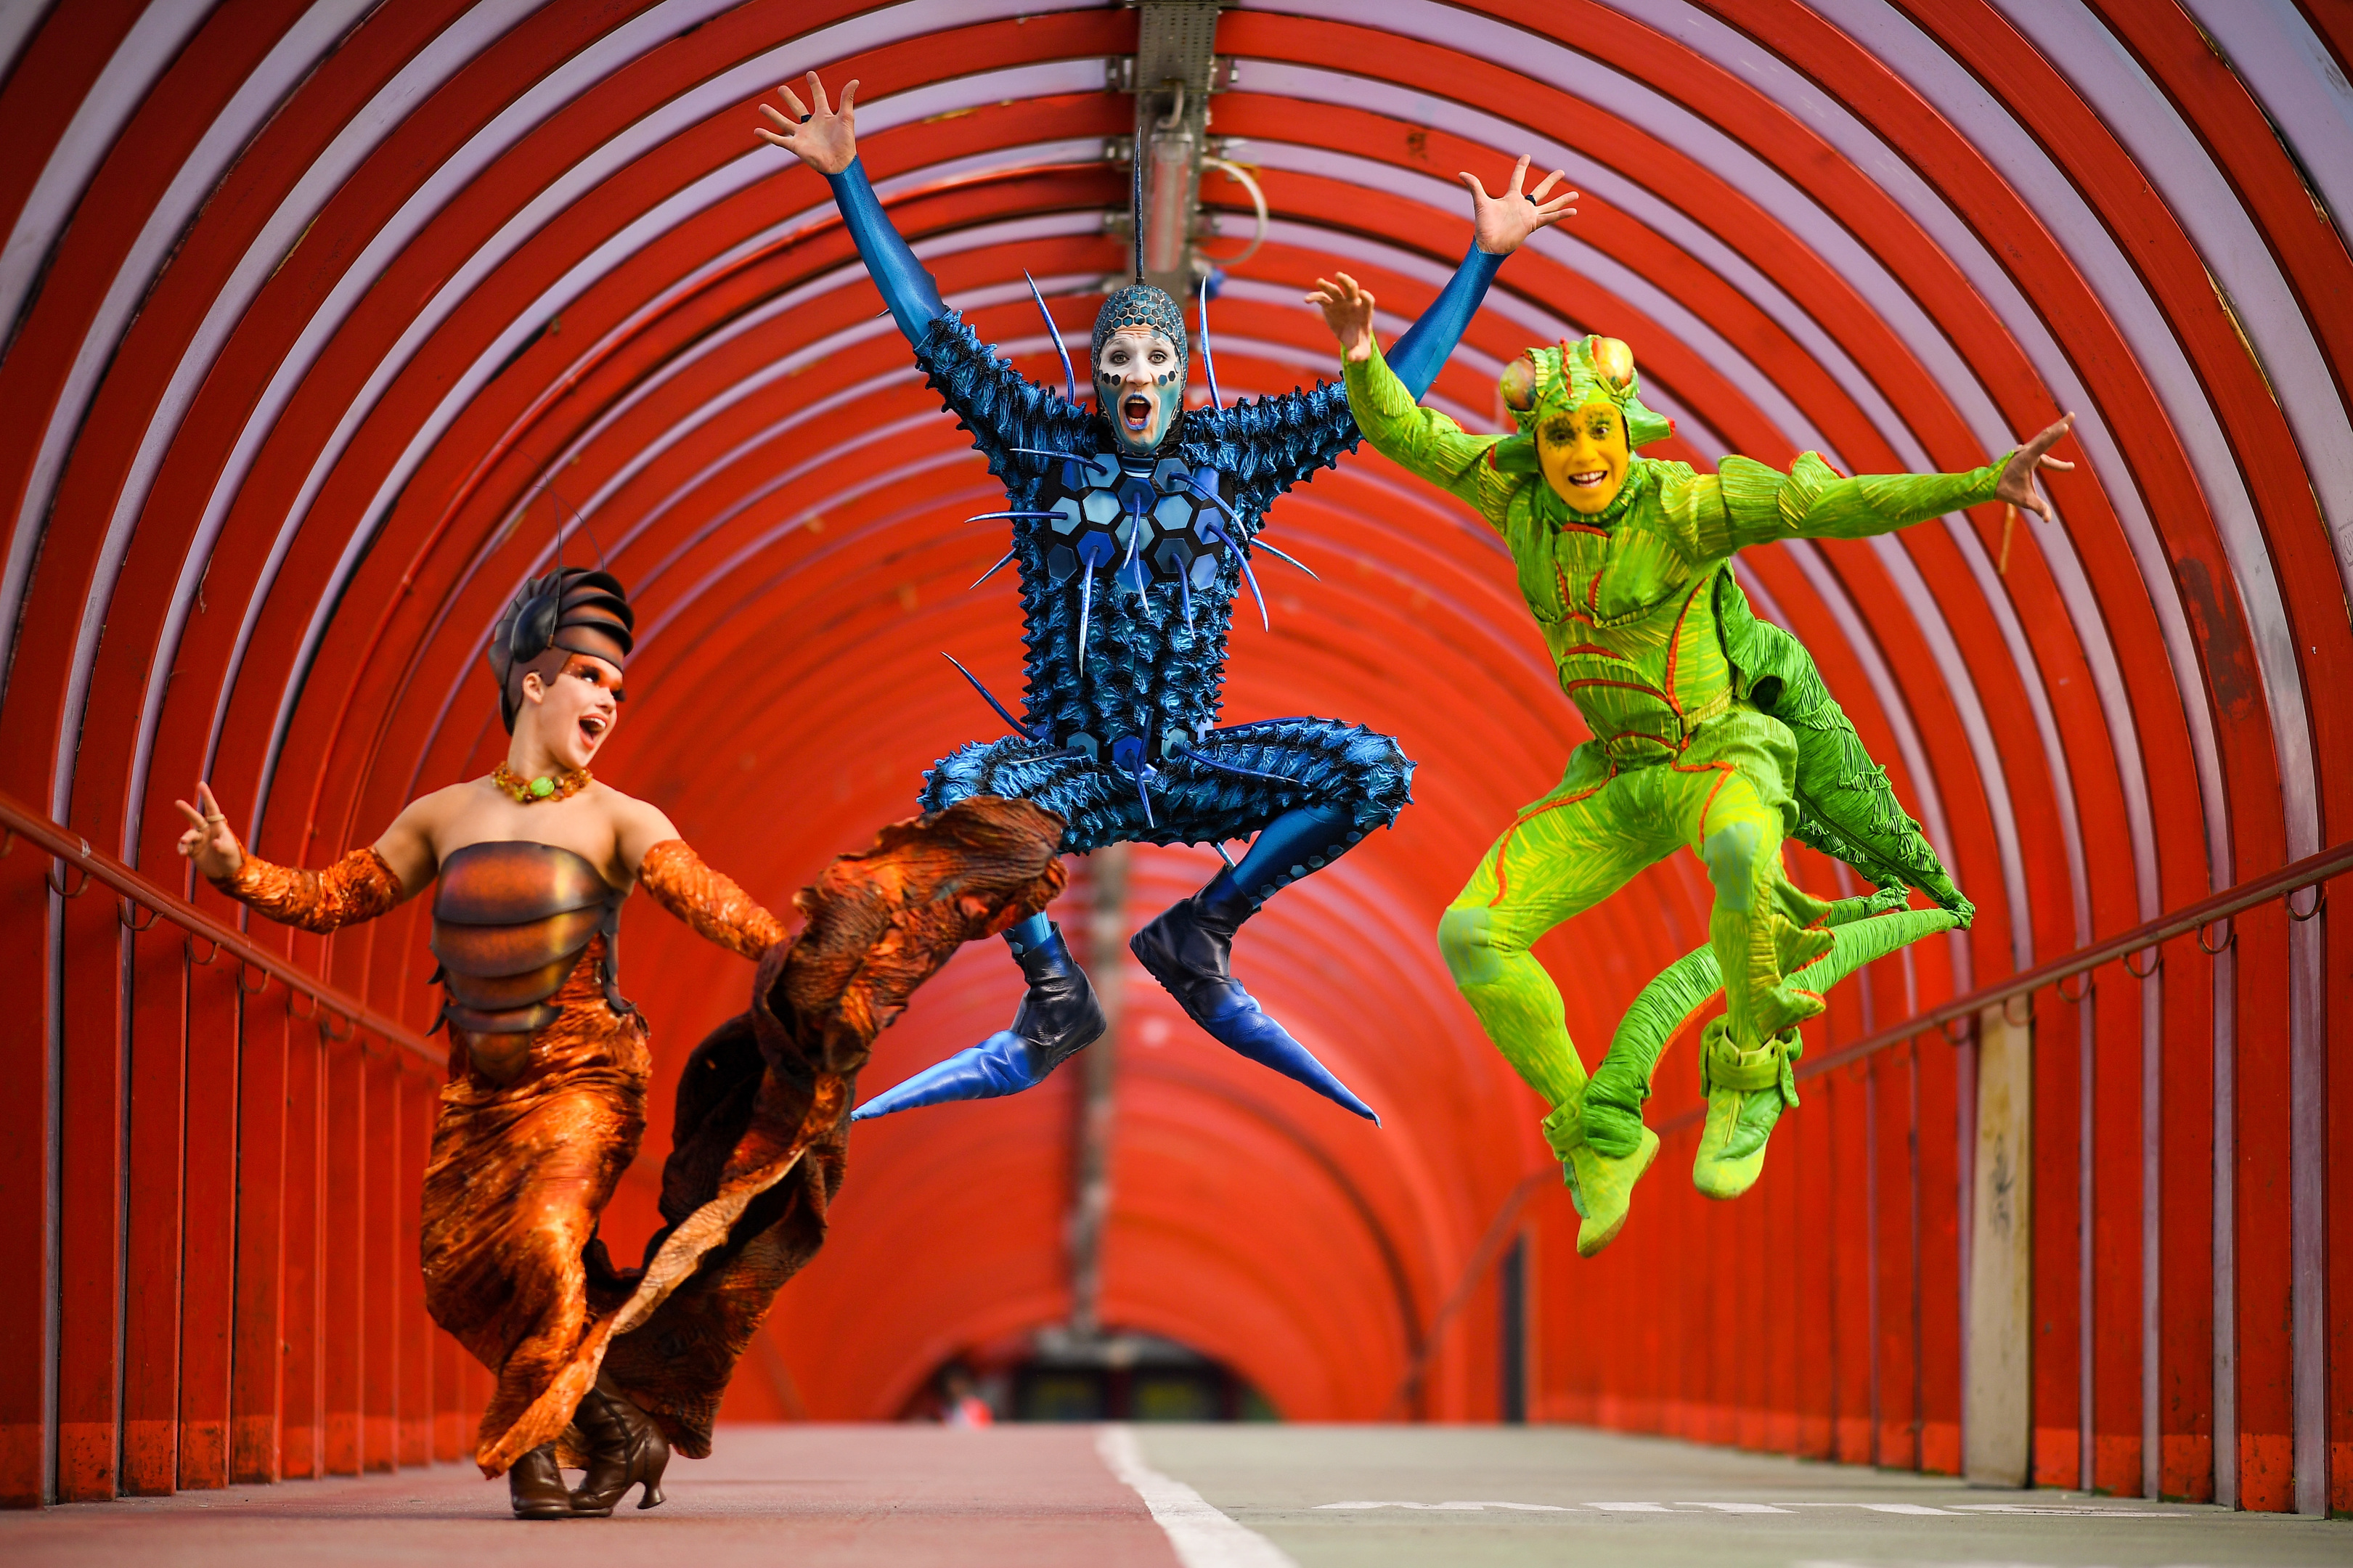 Cirque Du Soleil cast members Julia Tazie from Brazil, Jan Duther from Switzerland and Nathan Rivera-Drydak from Canada in the famous Exhibition Centre tunnel (Jeff J Mitchell/Getty Images)